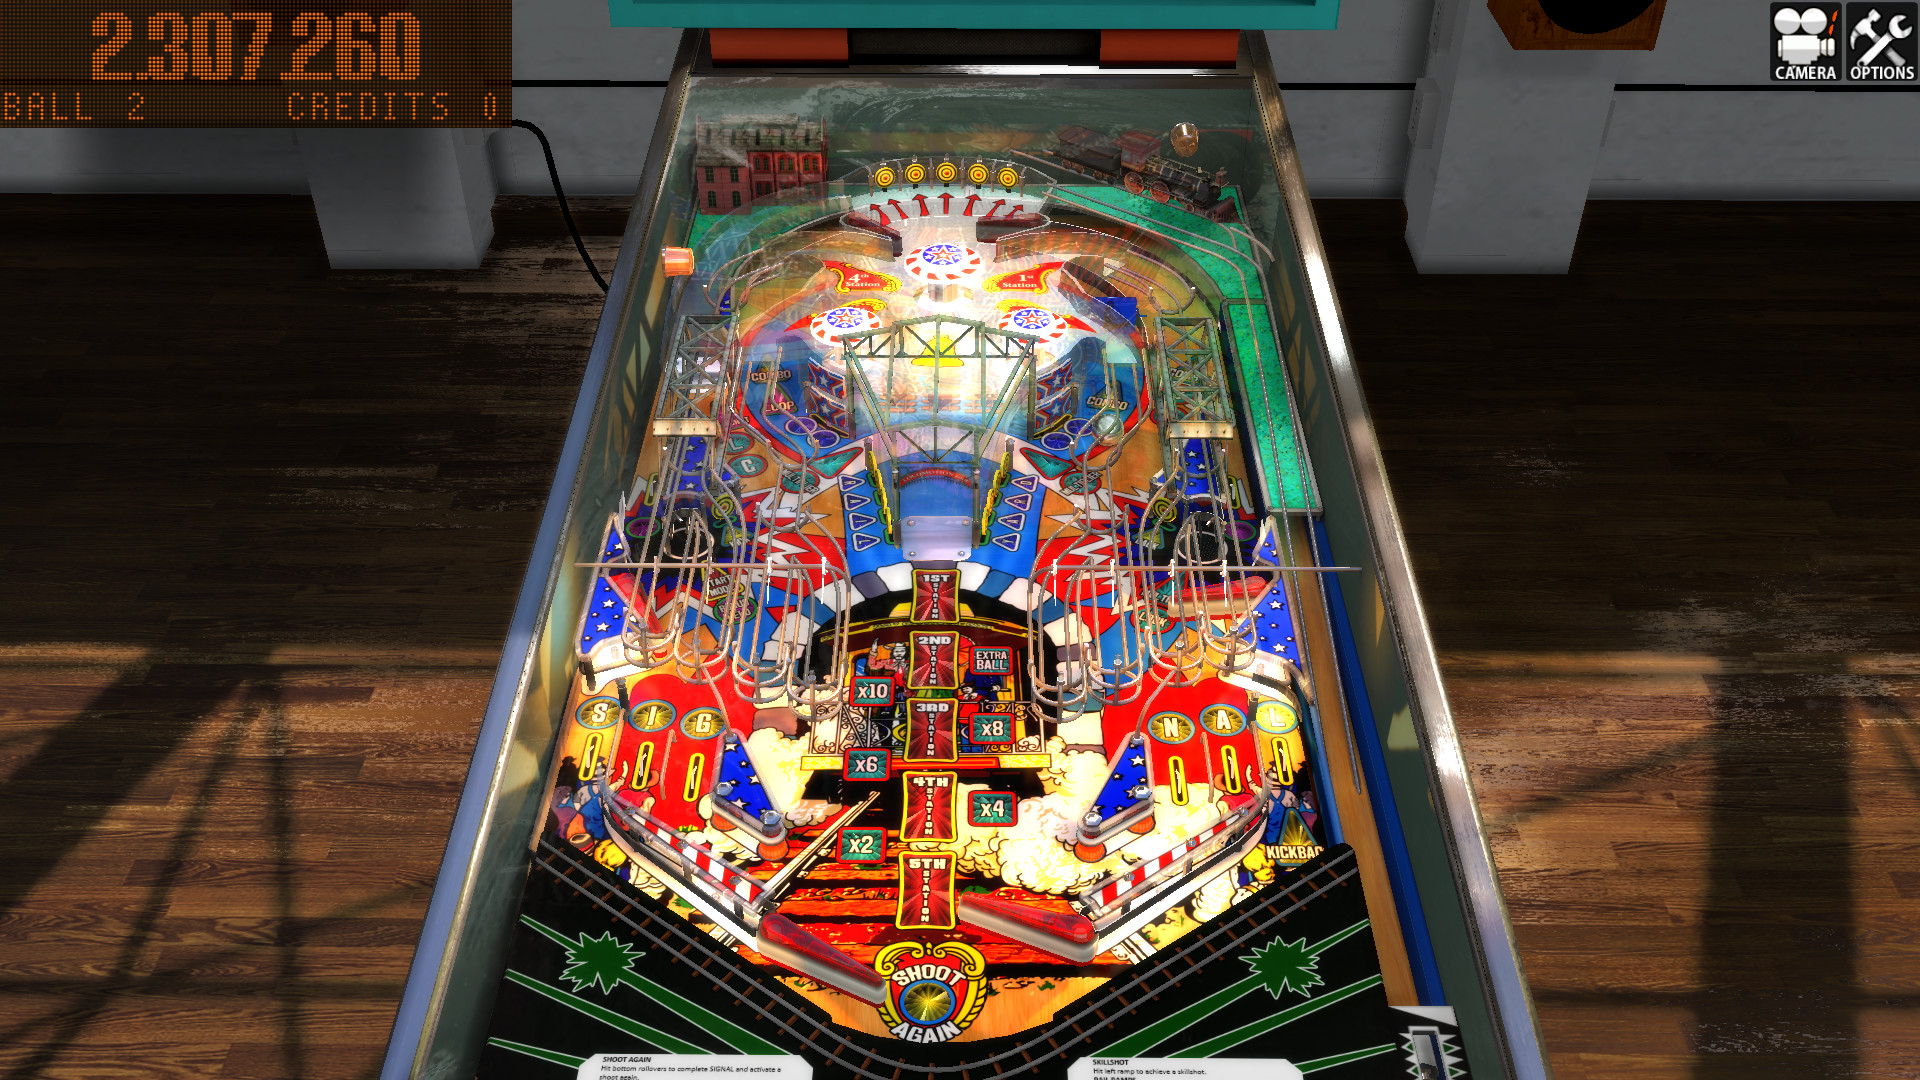 Zaccaria Pinball - Locomotion 2018 Table Featured Screenshot #1